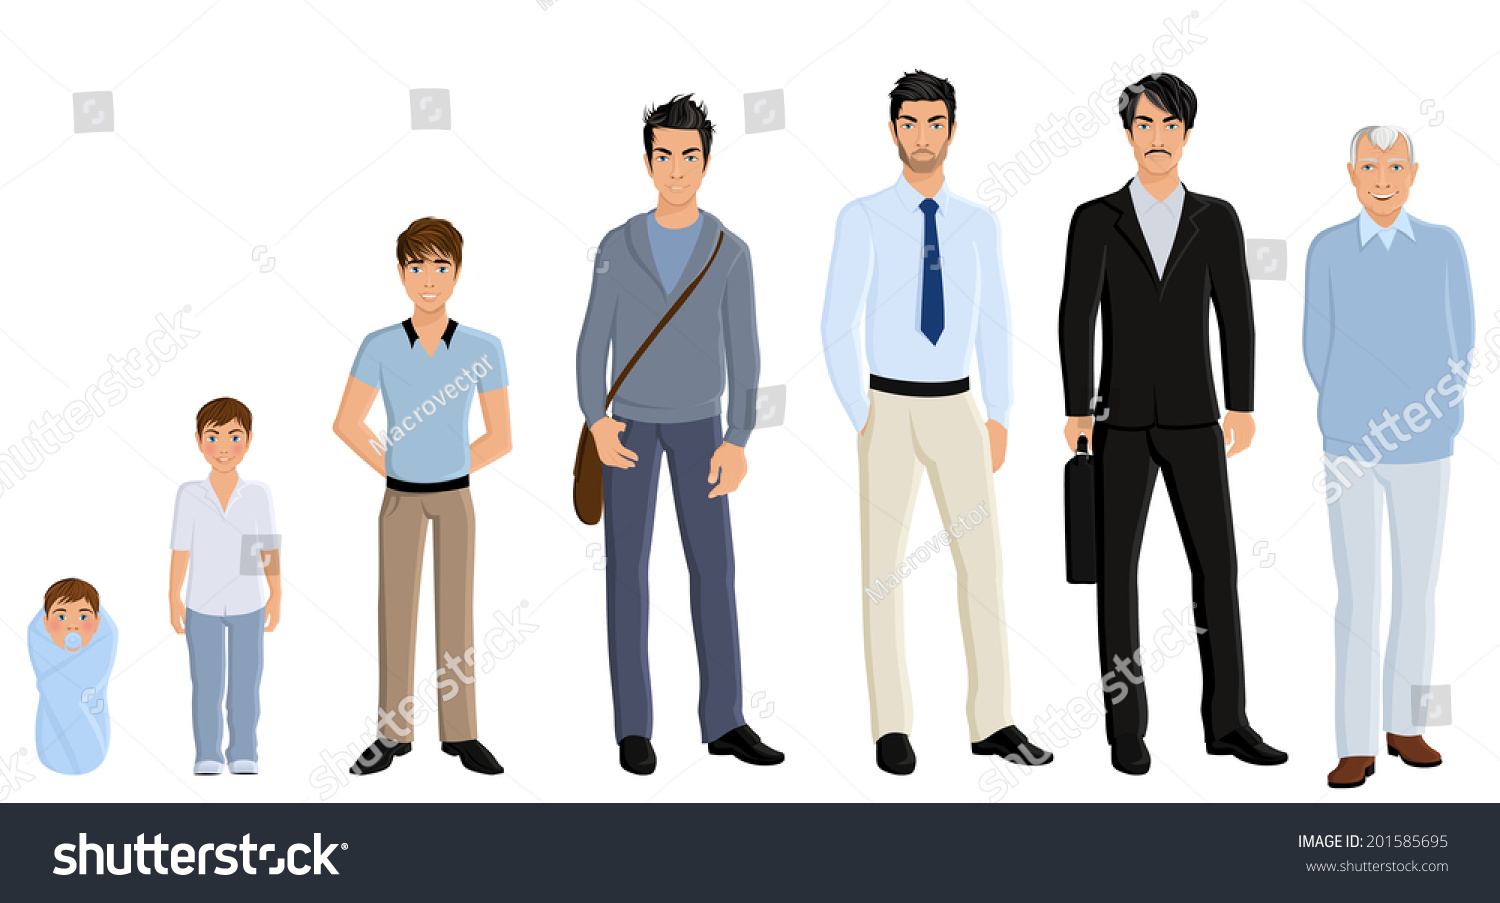 SVG of Different generation aging men set isolated on white background vector illustration svg